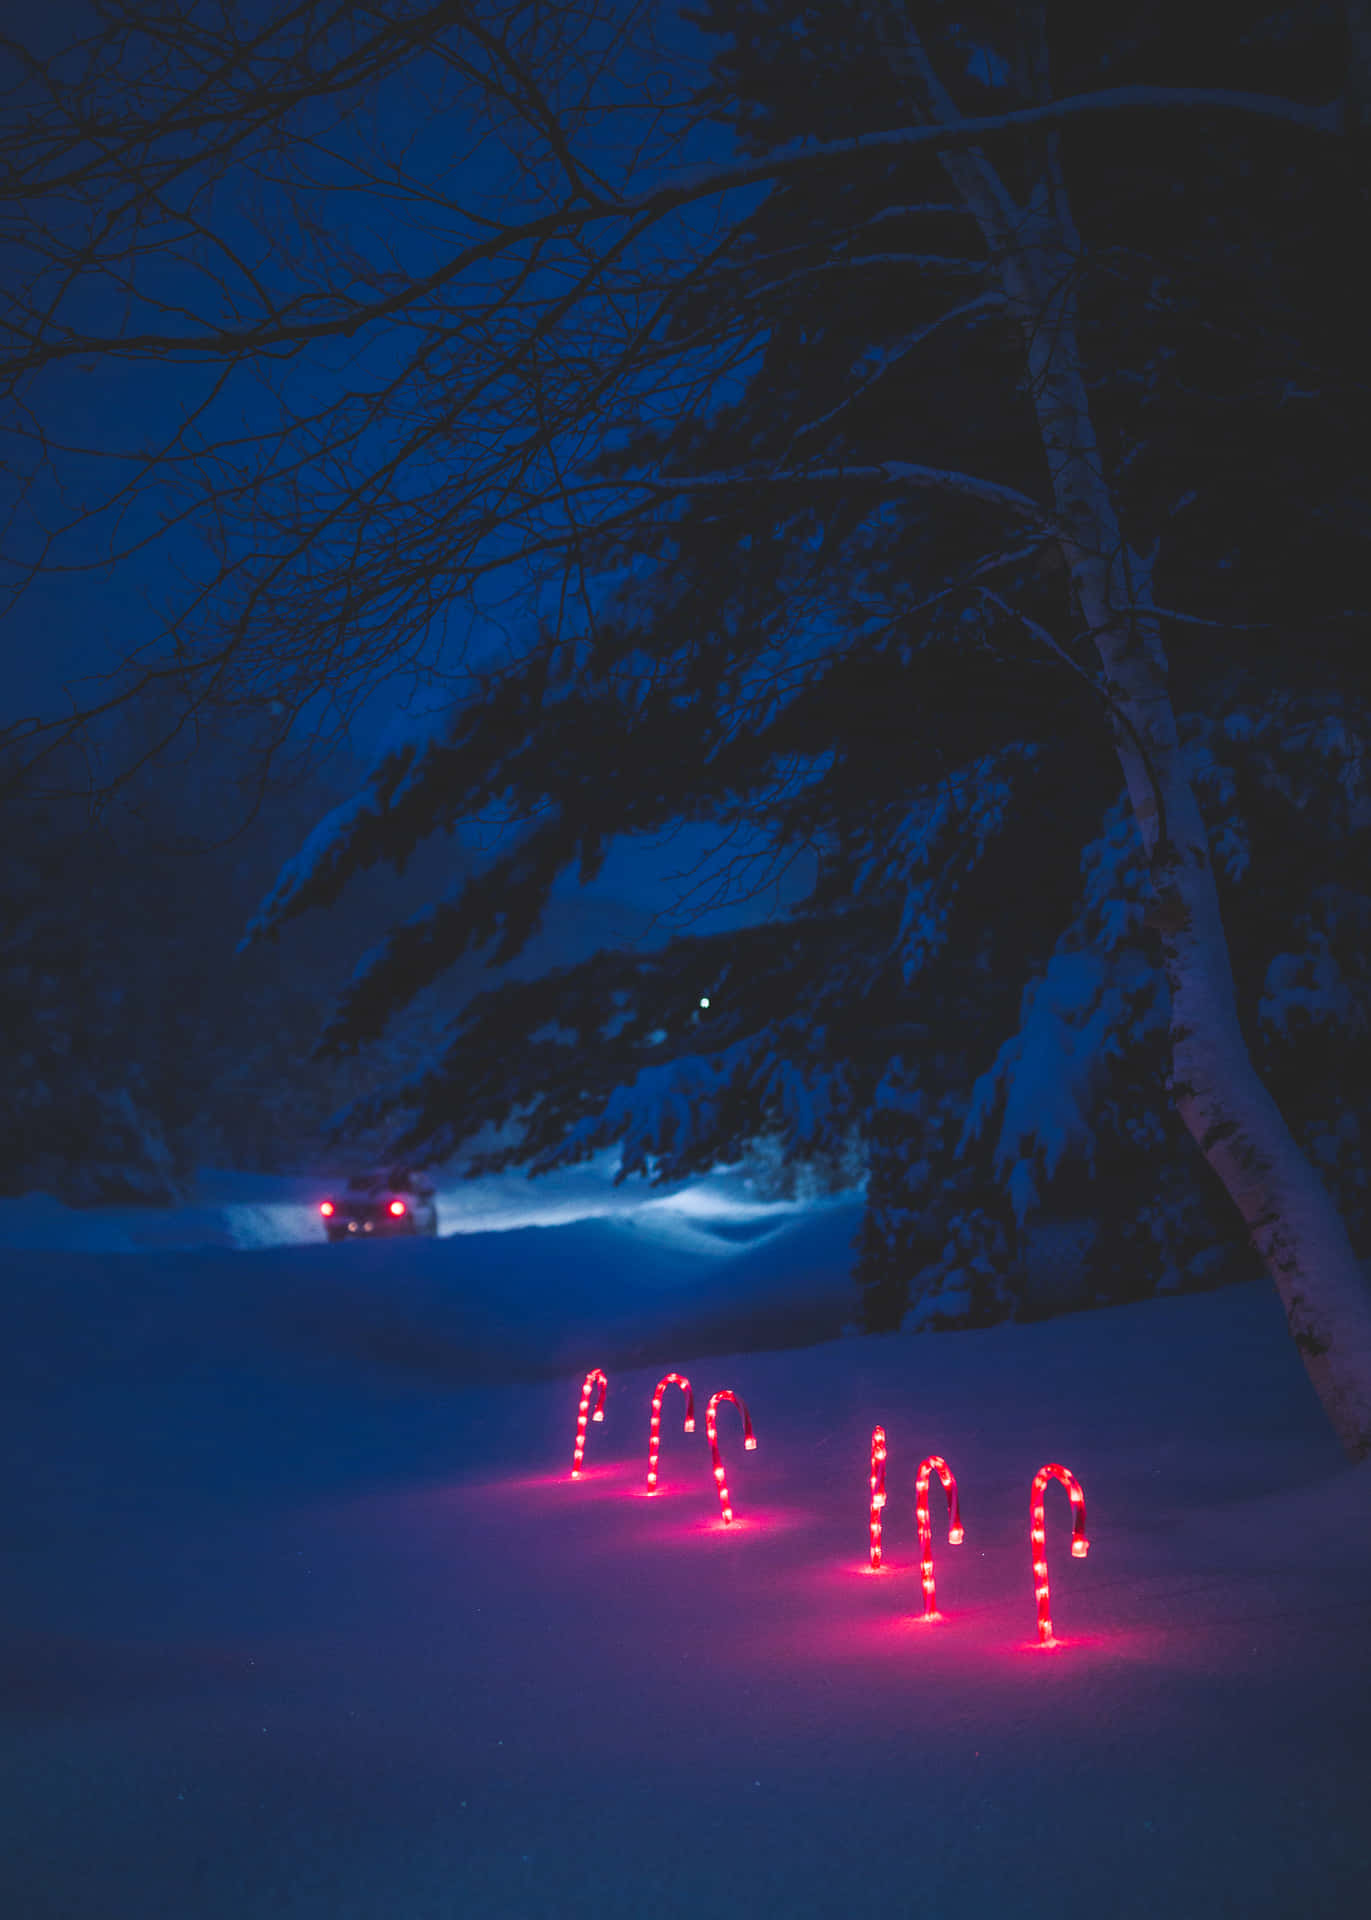 A magical Christmas Night spent beneath twinkling stars and a peaceful blanket of snow. Wallpaper